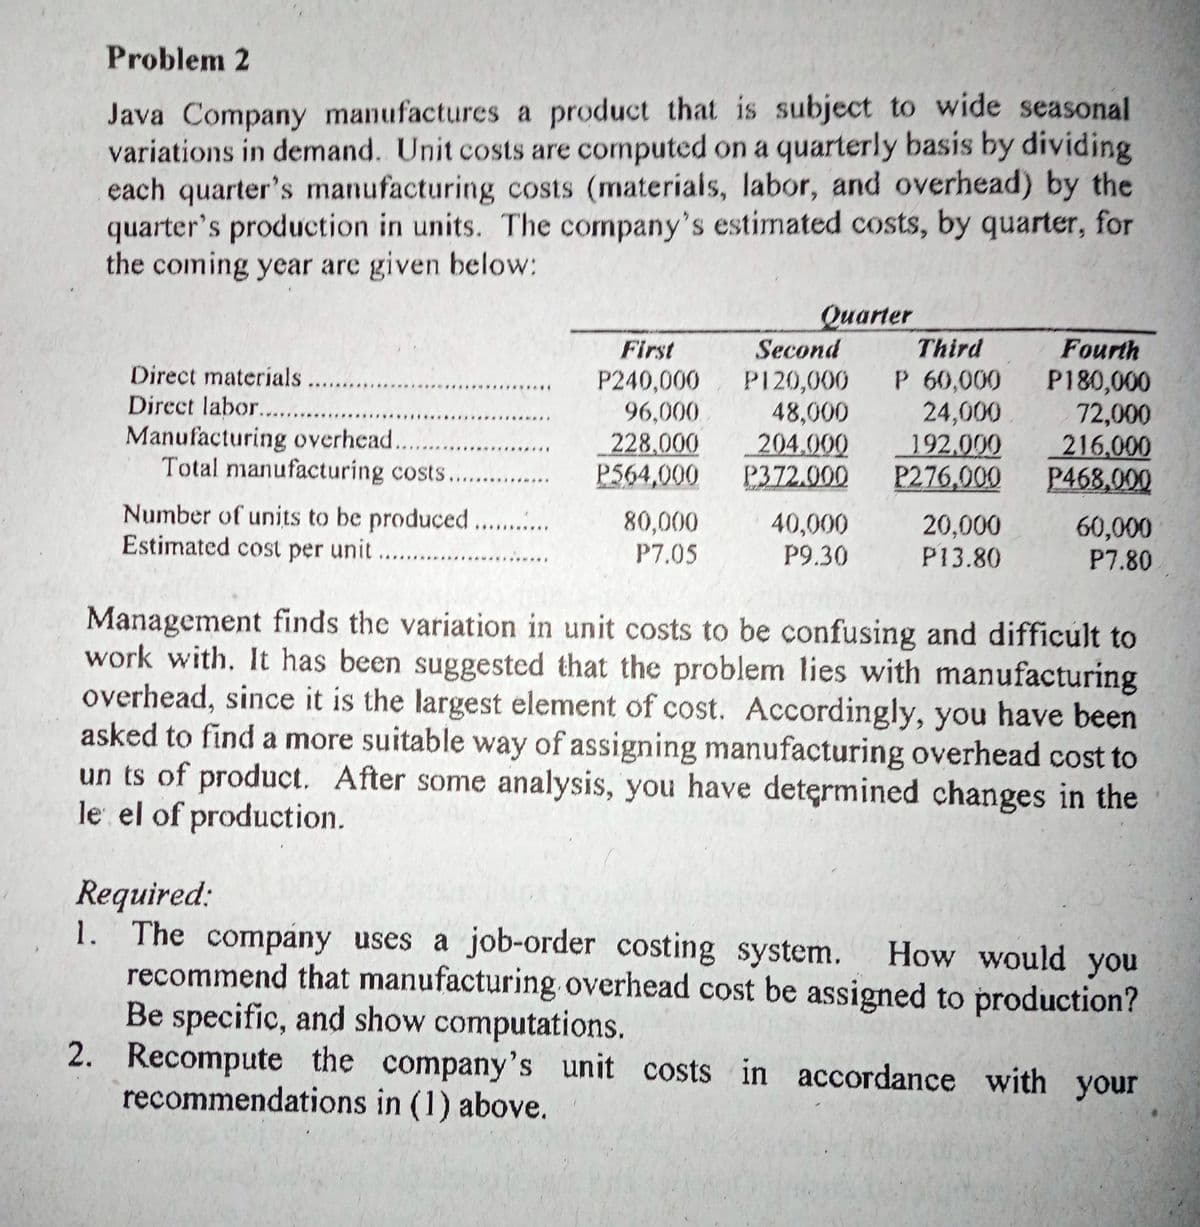 Problem 2
Java Company manufactures a product that is subject to wide seasonal
variations in demand. Unit costs are computed on a quarterly basis by dividing
each quarter's manufacturing costs (materials, labor, and overhead) by the
quarter's production in units. The company's estimated costs, by quarter, for
the coming year are given below:
Quarter
First
Second
Third
Fourth
Direct materials
Direct labor. ..
Manufacturing overhead. .
Total manufacturing costs....
P240,000 P120,000
96,000
228.000
P564,000
48,000
204.000
P372.000
P 60,000
24,000
192,000
P276,000
P180,000
72,000
216.000
P468,000
Number of units to be produced. .
Estimated cost per unit ...
80,000
P7.05
40,000
P9.30
20,000
P13.80
60,000
P7.80
Management finds the variation in unit costs to be confusing and difficult to
work with. It has been suggested that the problem lies with manufacturing
overhead, since it is the largest element of cost. Accordingly, you have been
asked to find a more suitable way of assigning manufacturing overhead cost to
un ts of product. After some analysis, you have determined changes in the
le el of production.
Required:
1. The company uses a job-order costing system. How would you
recommend that manufacturing overhead cost be assigned to production?
Be specific, and show computations.
2. Recompute the company's unit costs in accordance with your
recommendations in (1) above.
